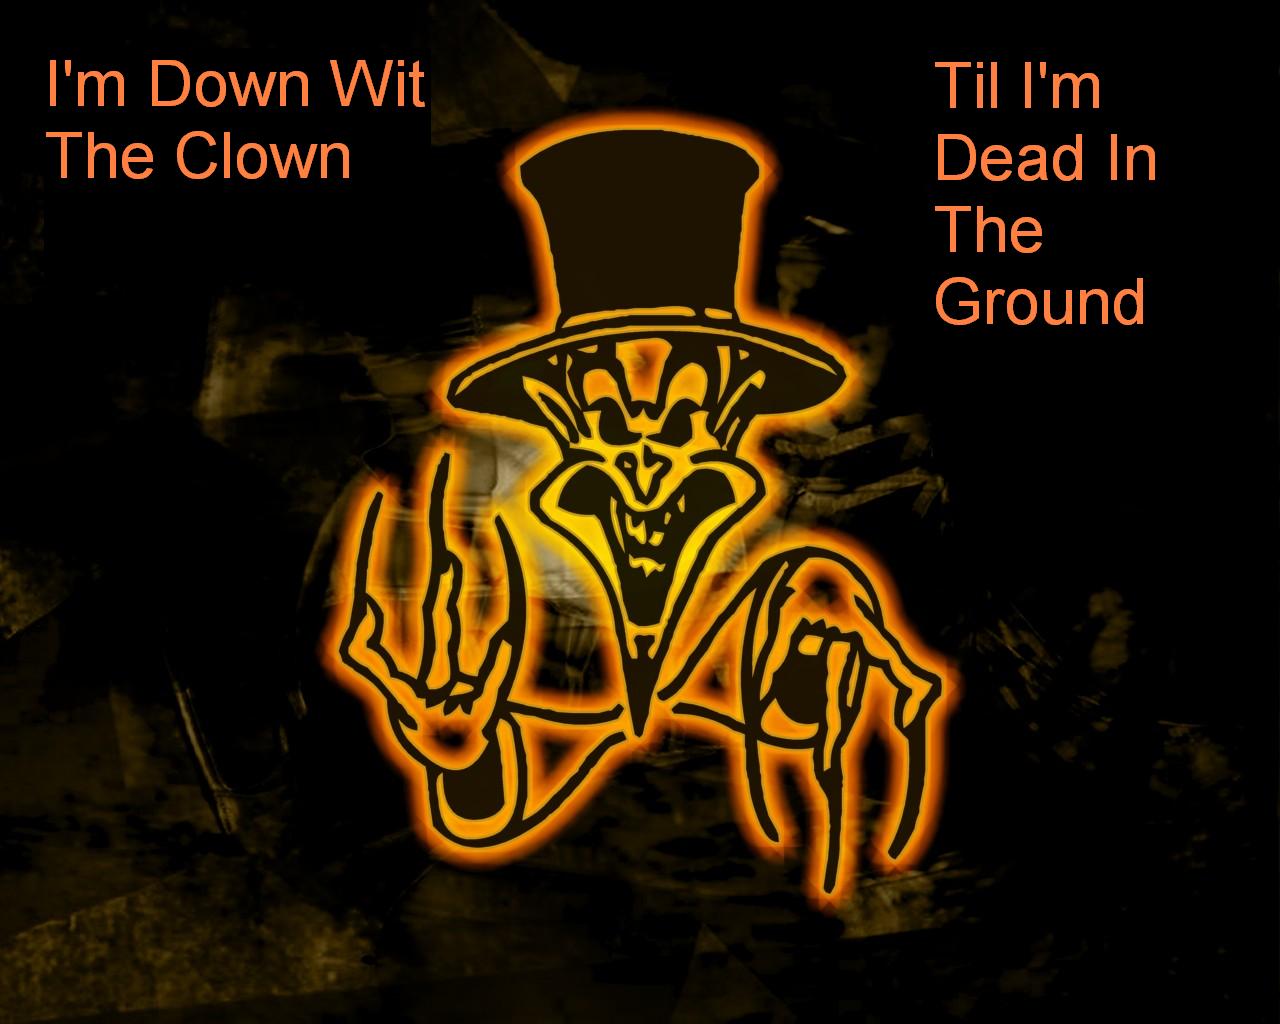 Insane Clown Posse Wallpaper and Background Imagex1024